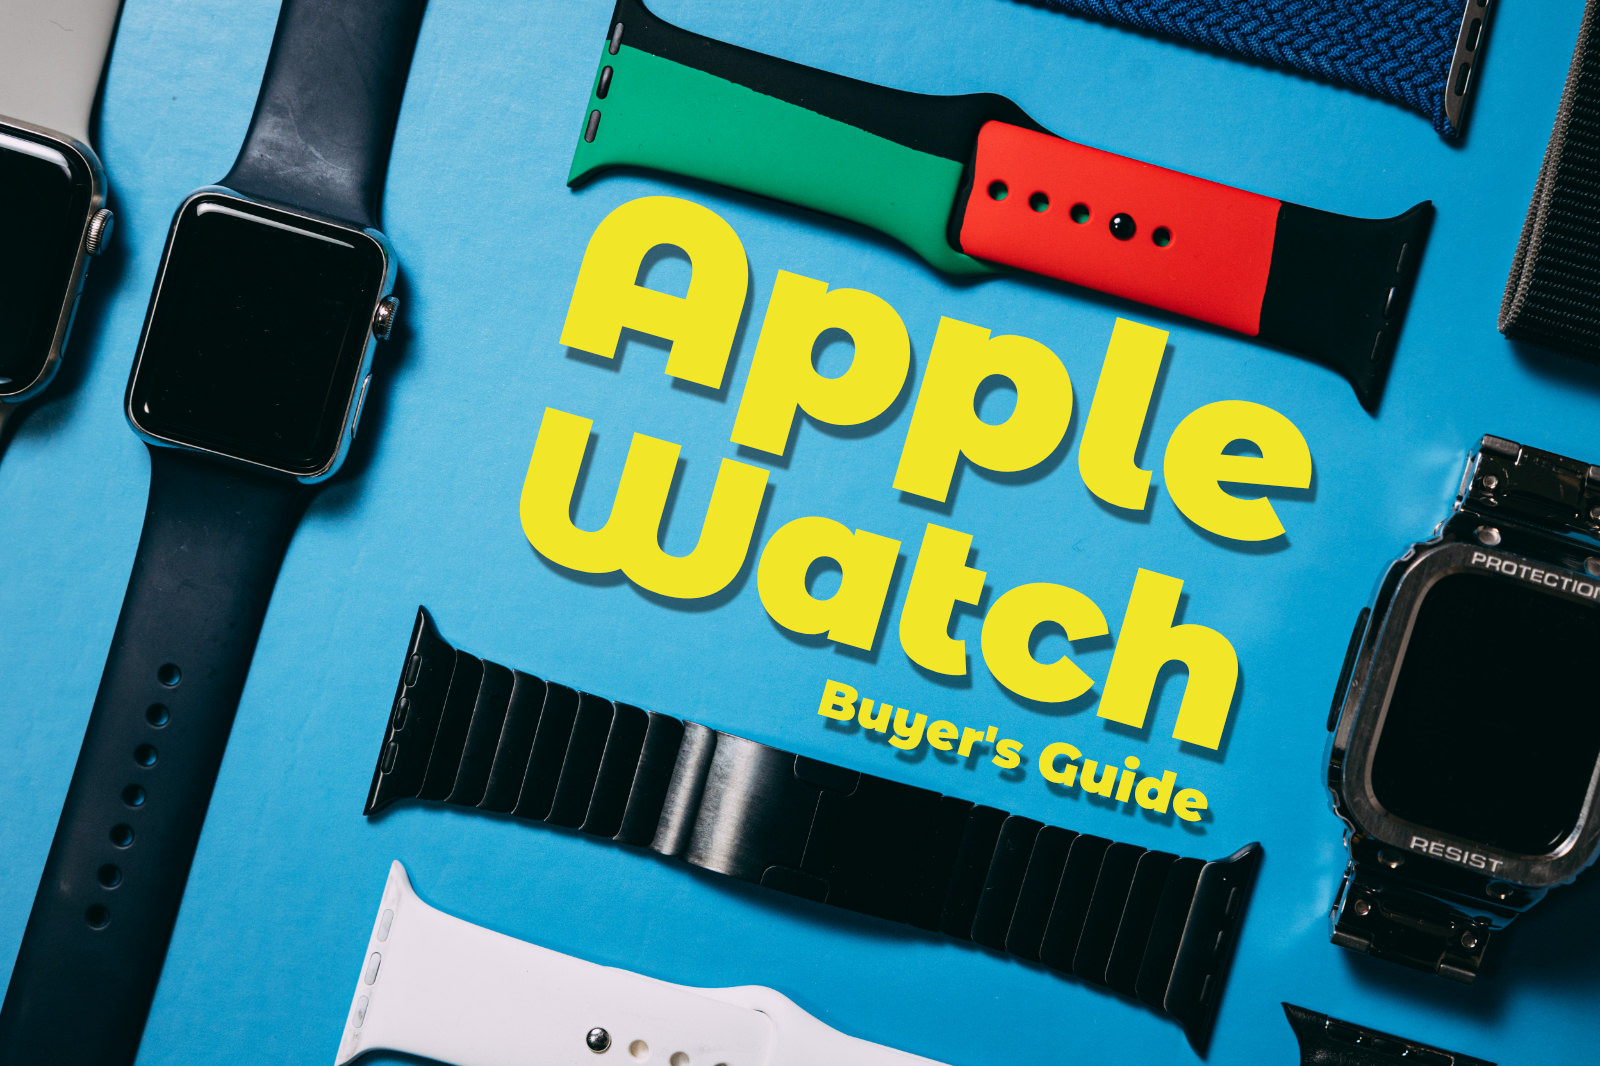 GoriMe-Buyers-Guide-for-AppleWatch.jpg